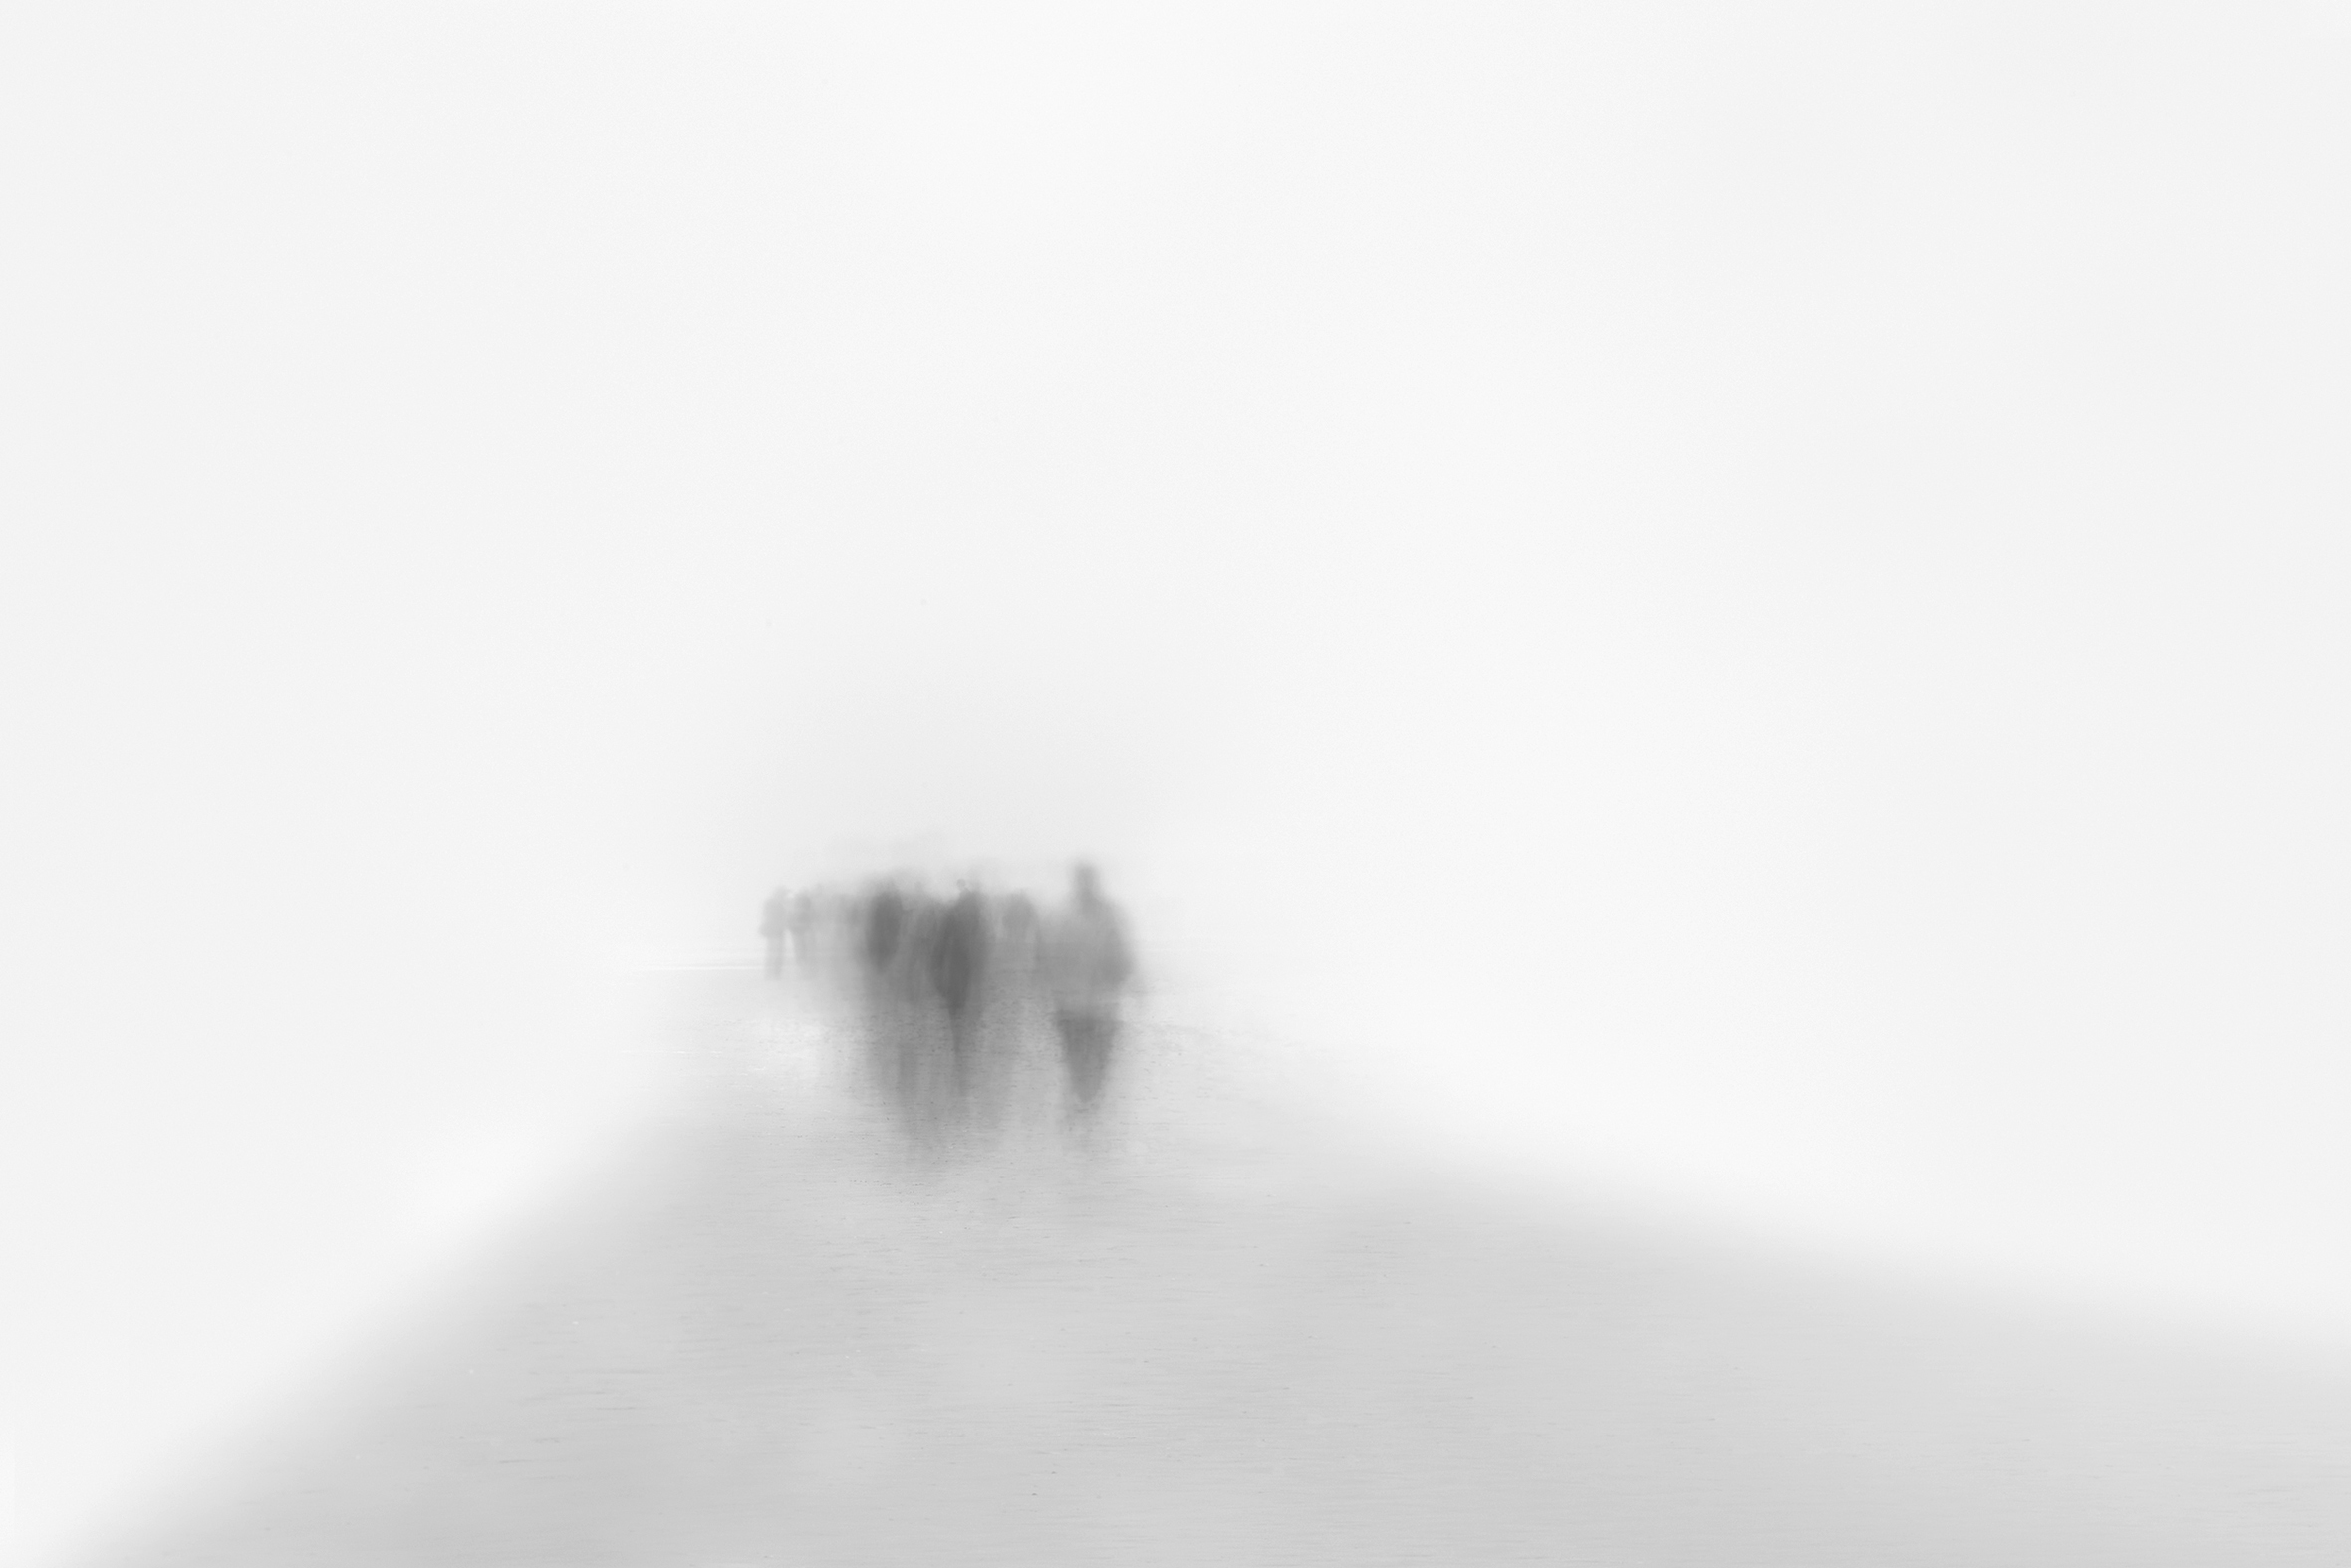 A small, tight grouping of faint, shadowy figures seem to be walking from the light gray foreground toward the opaque whiteness of the background that dominates the image.